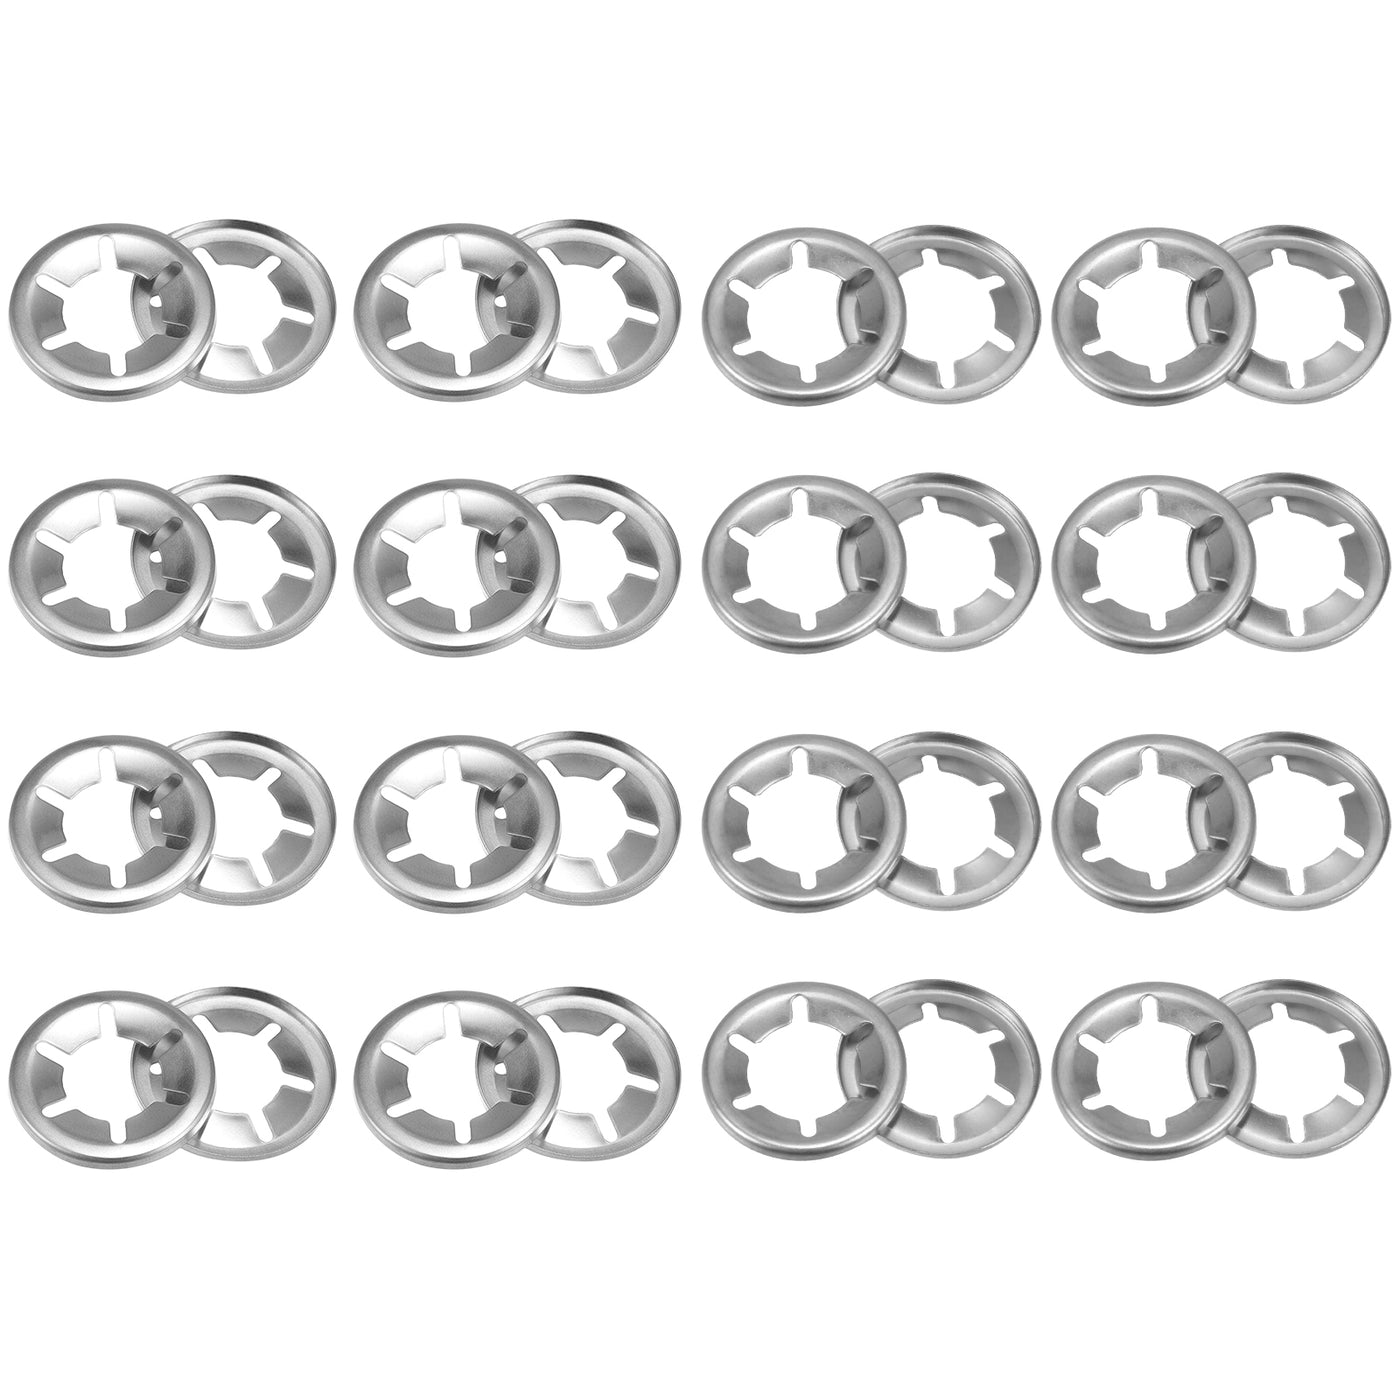 uxcell Uxcell 20pcs Internal Tooth Star Lock Washers Set M14 M16 Push on Retaining Clips Quick Speed Locking Washers, 304 Stainless Steel Push Nuts